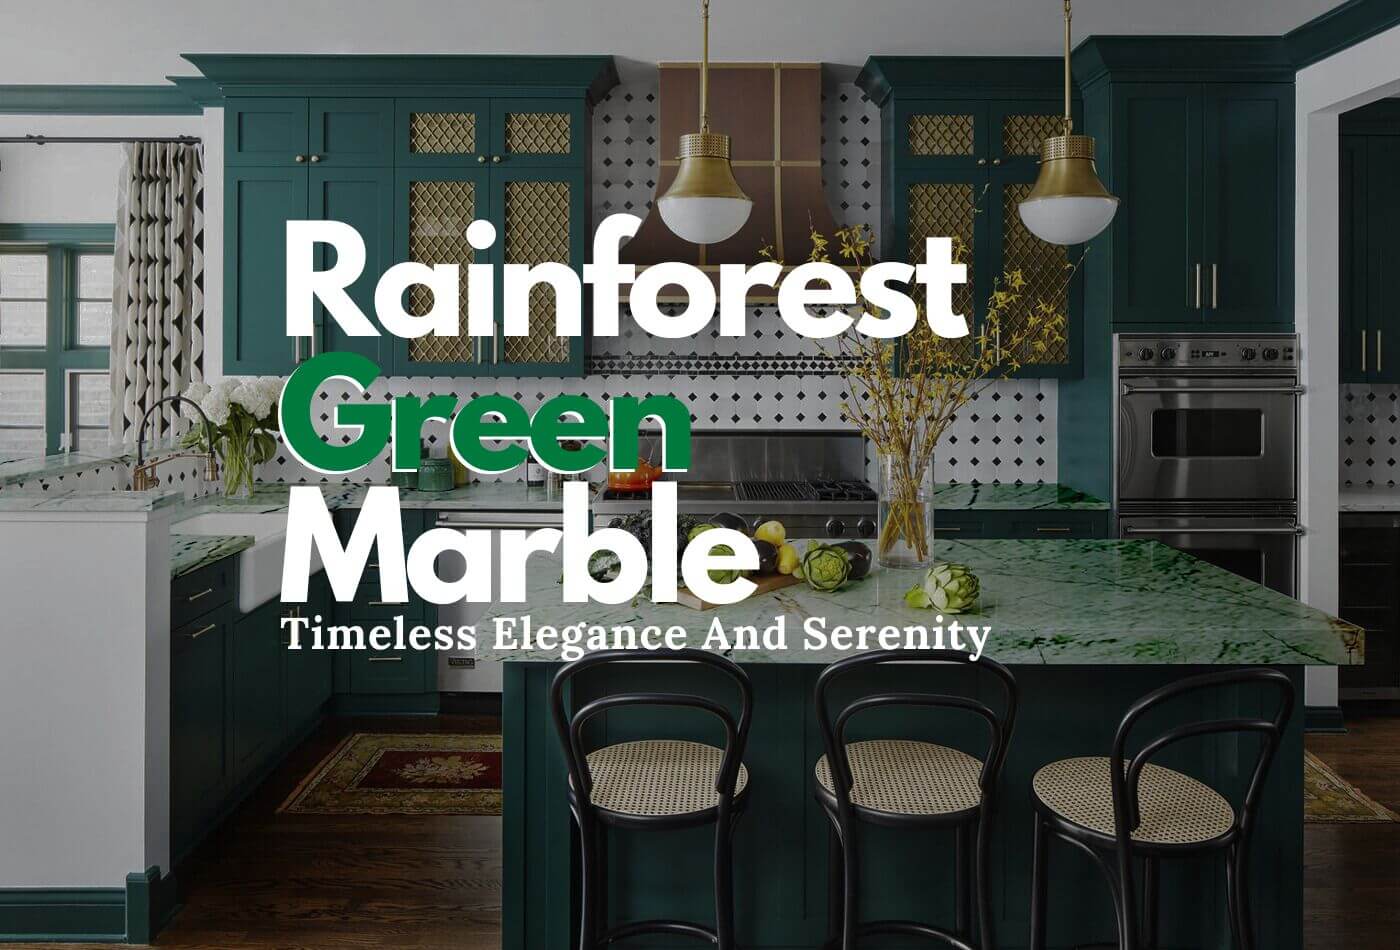 Rainforest Green Marble For Timeless Elegance And Serenity